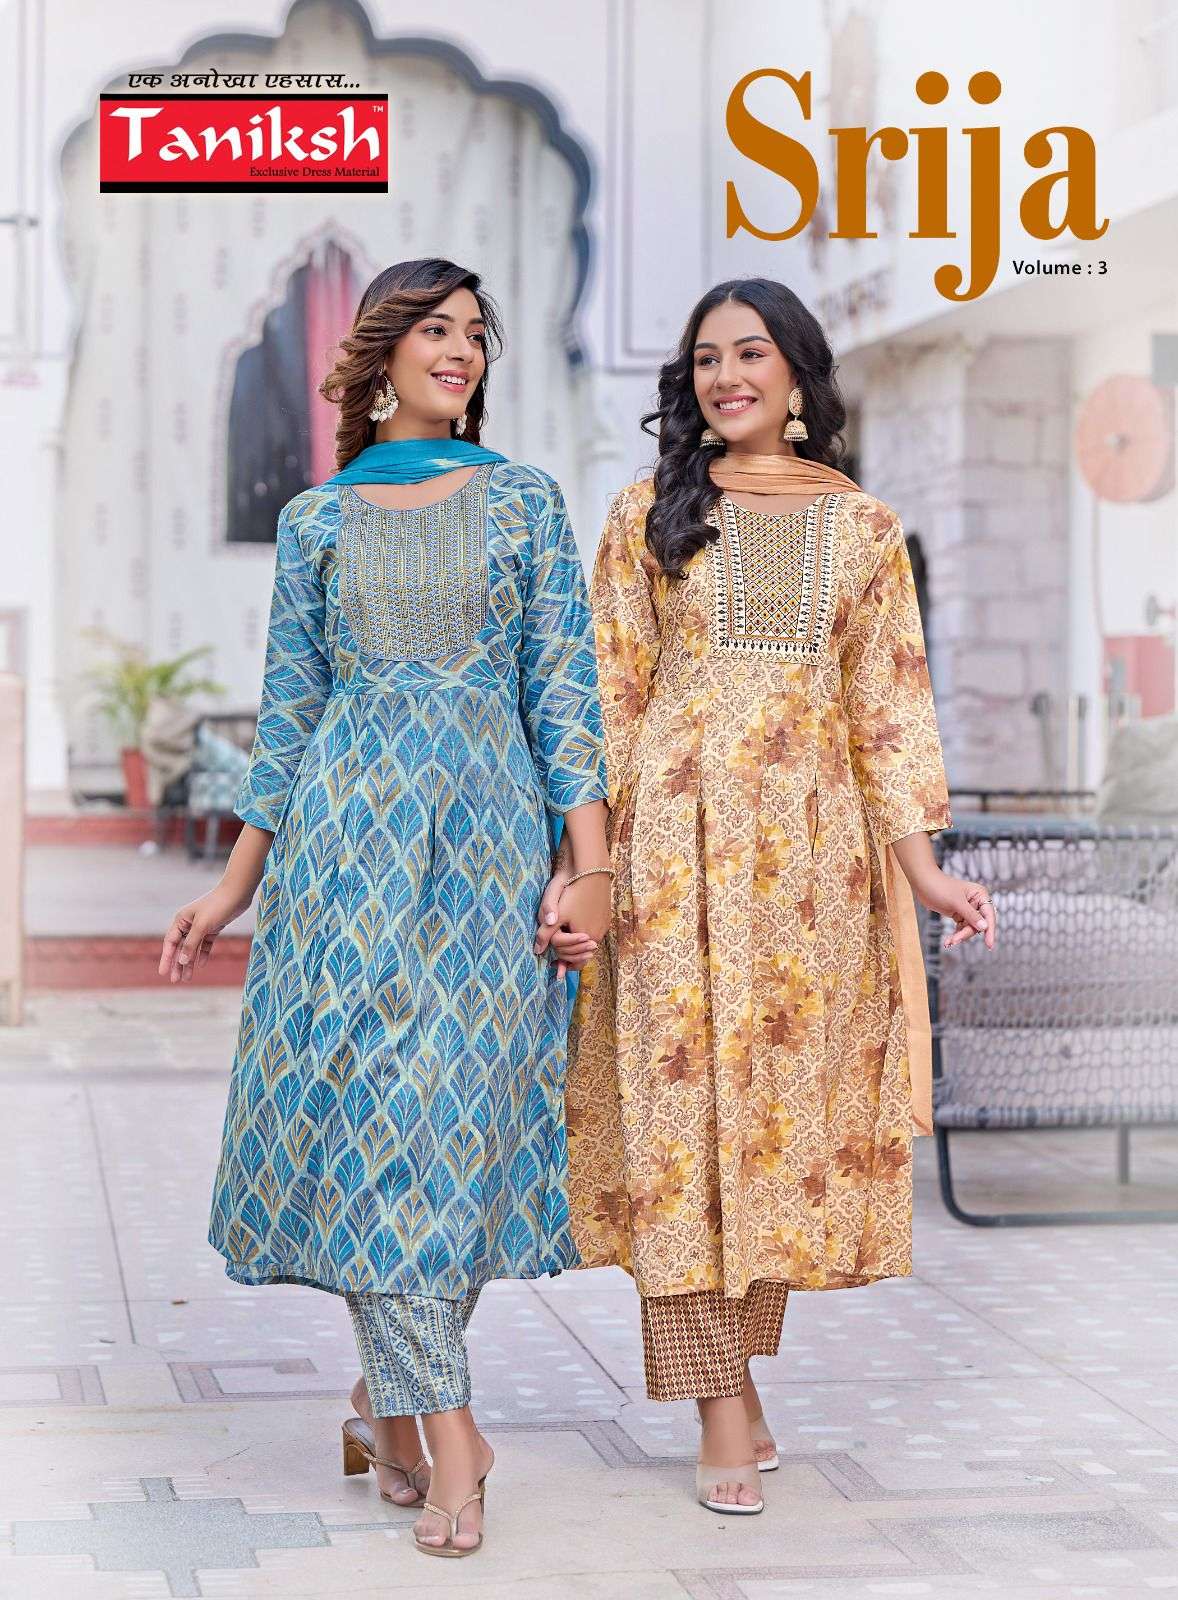 25 Latest Collection of W Brand Kurtis for Women in India | Indian outfits  lehenga, Women, Women of india